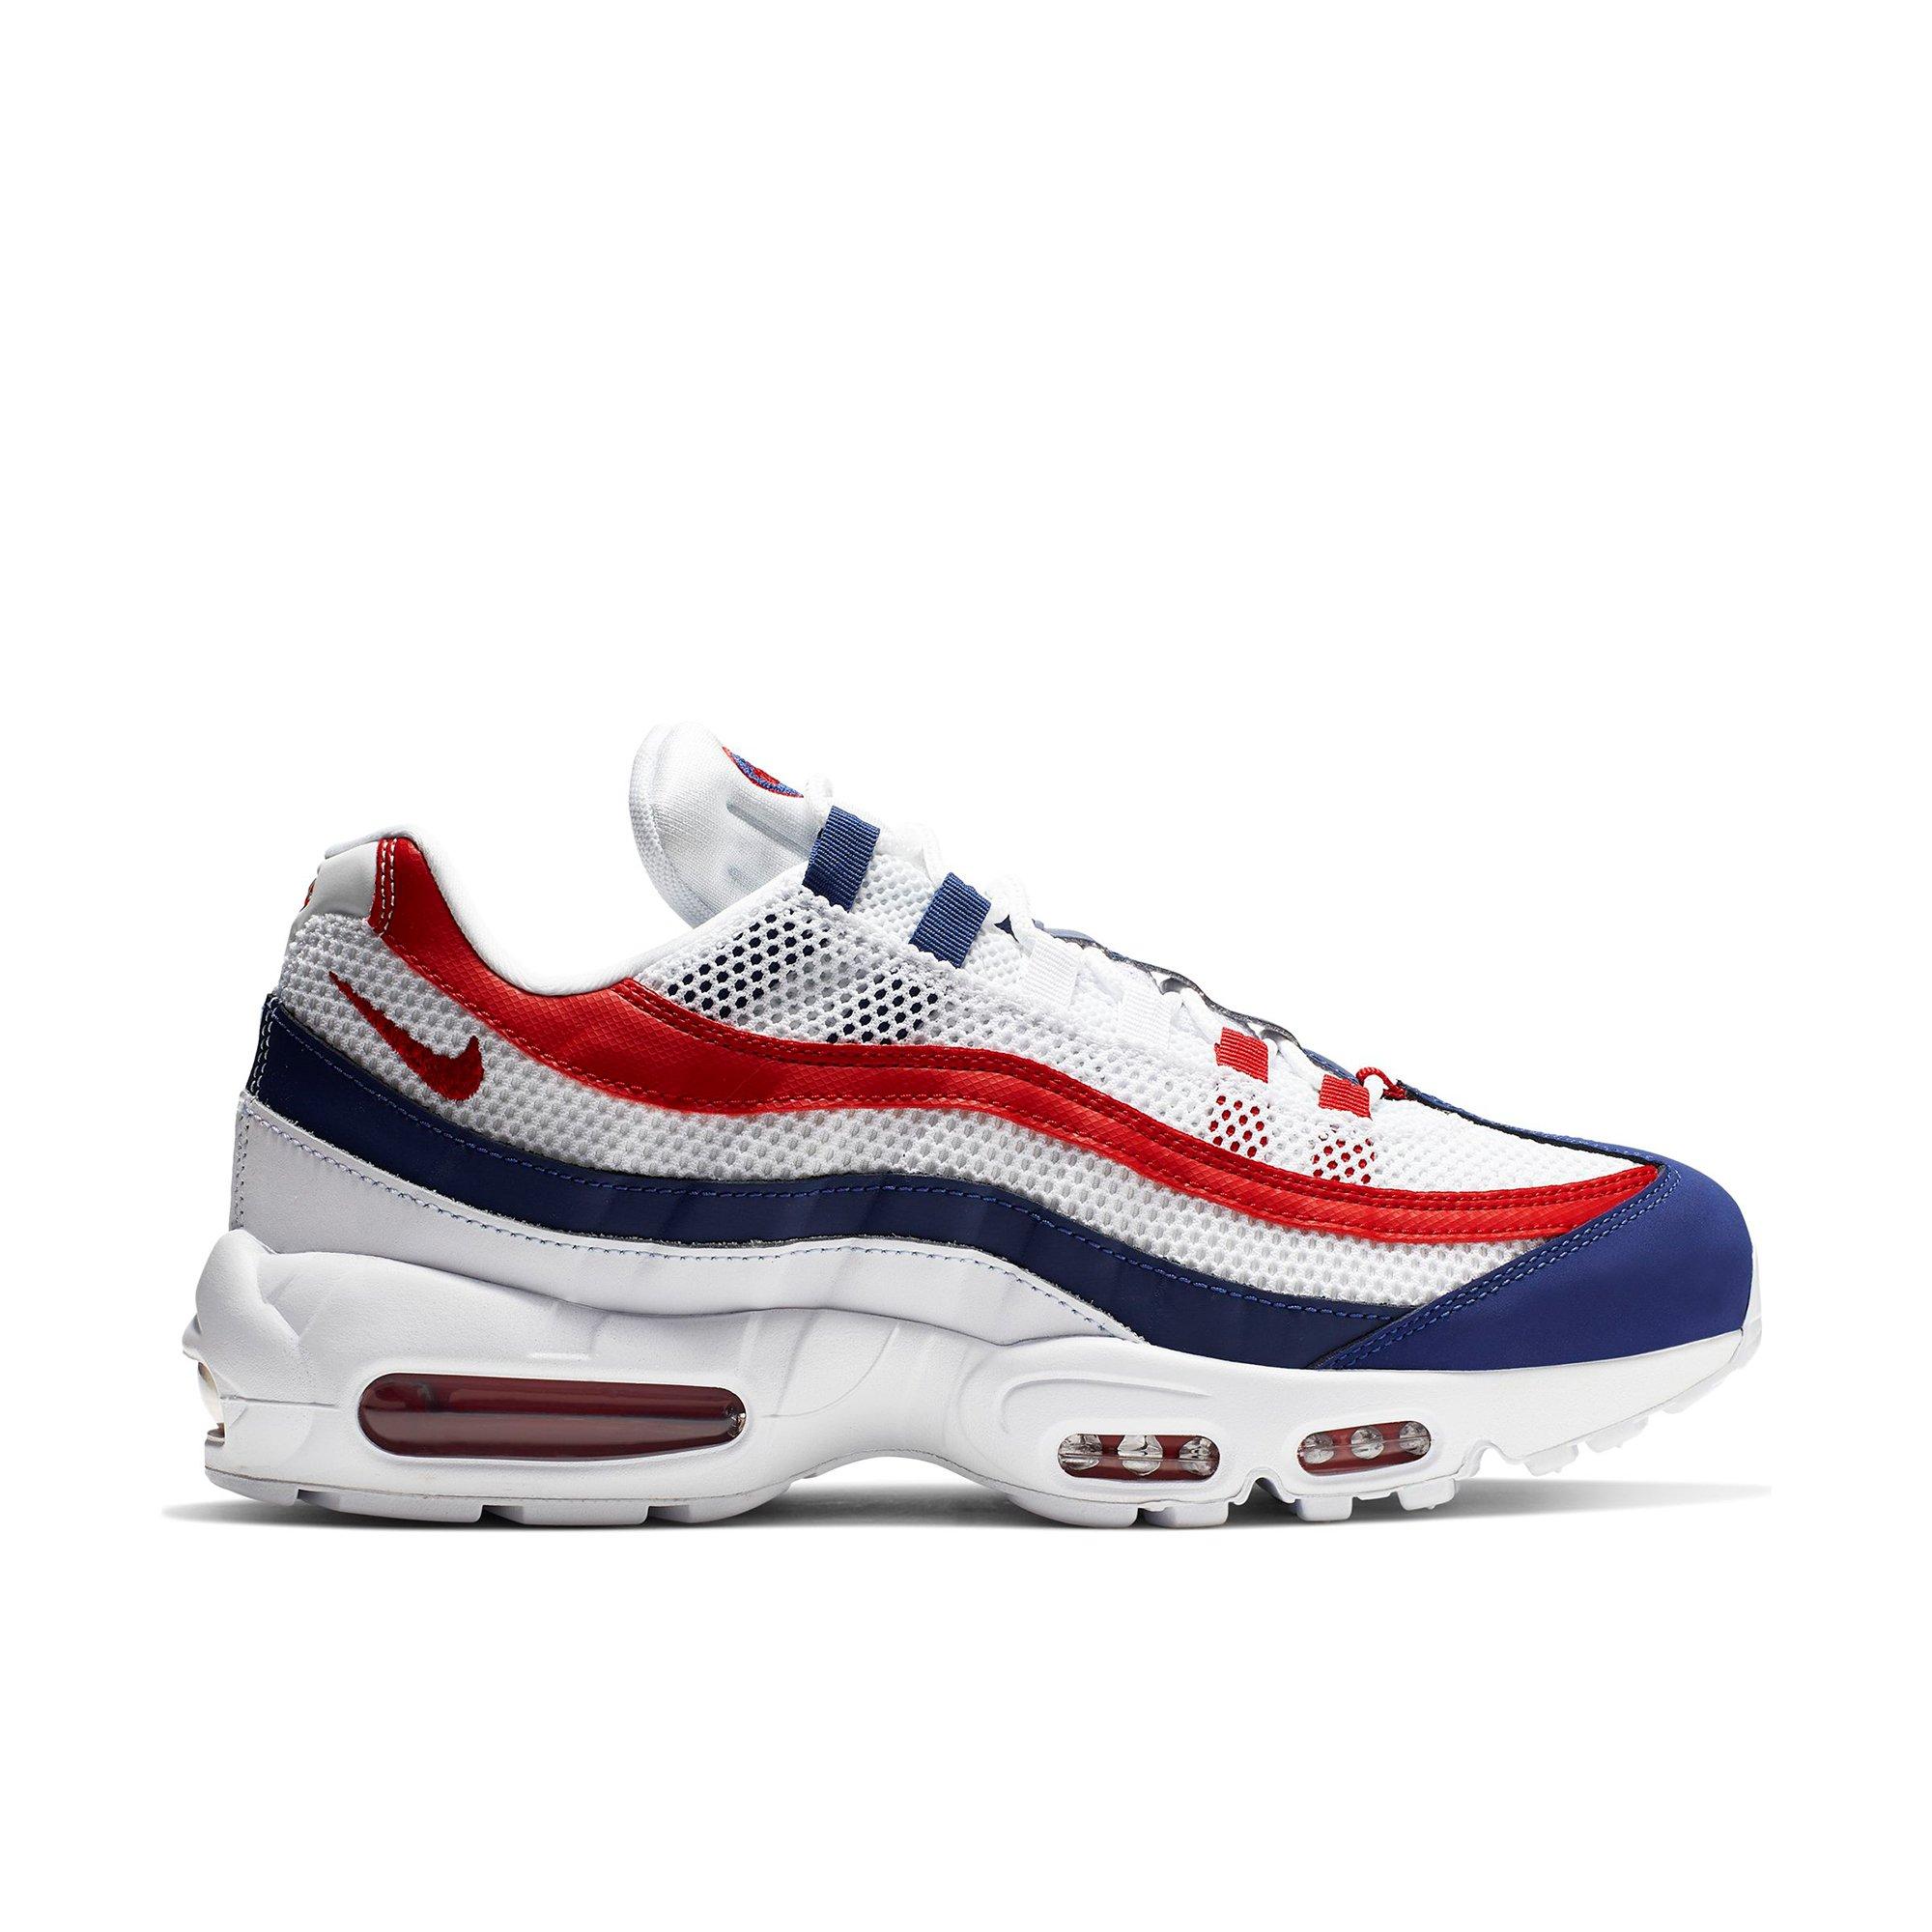 white blue and red air max 95